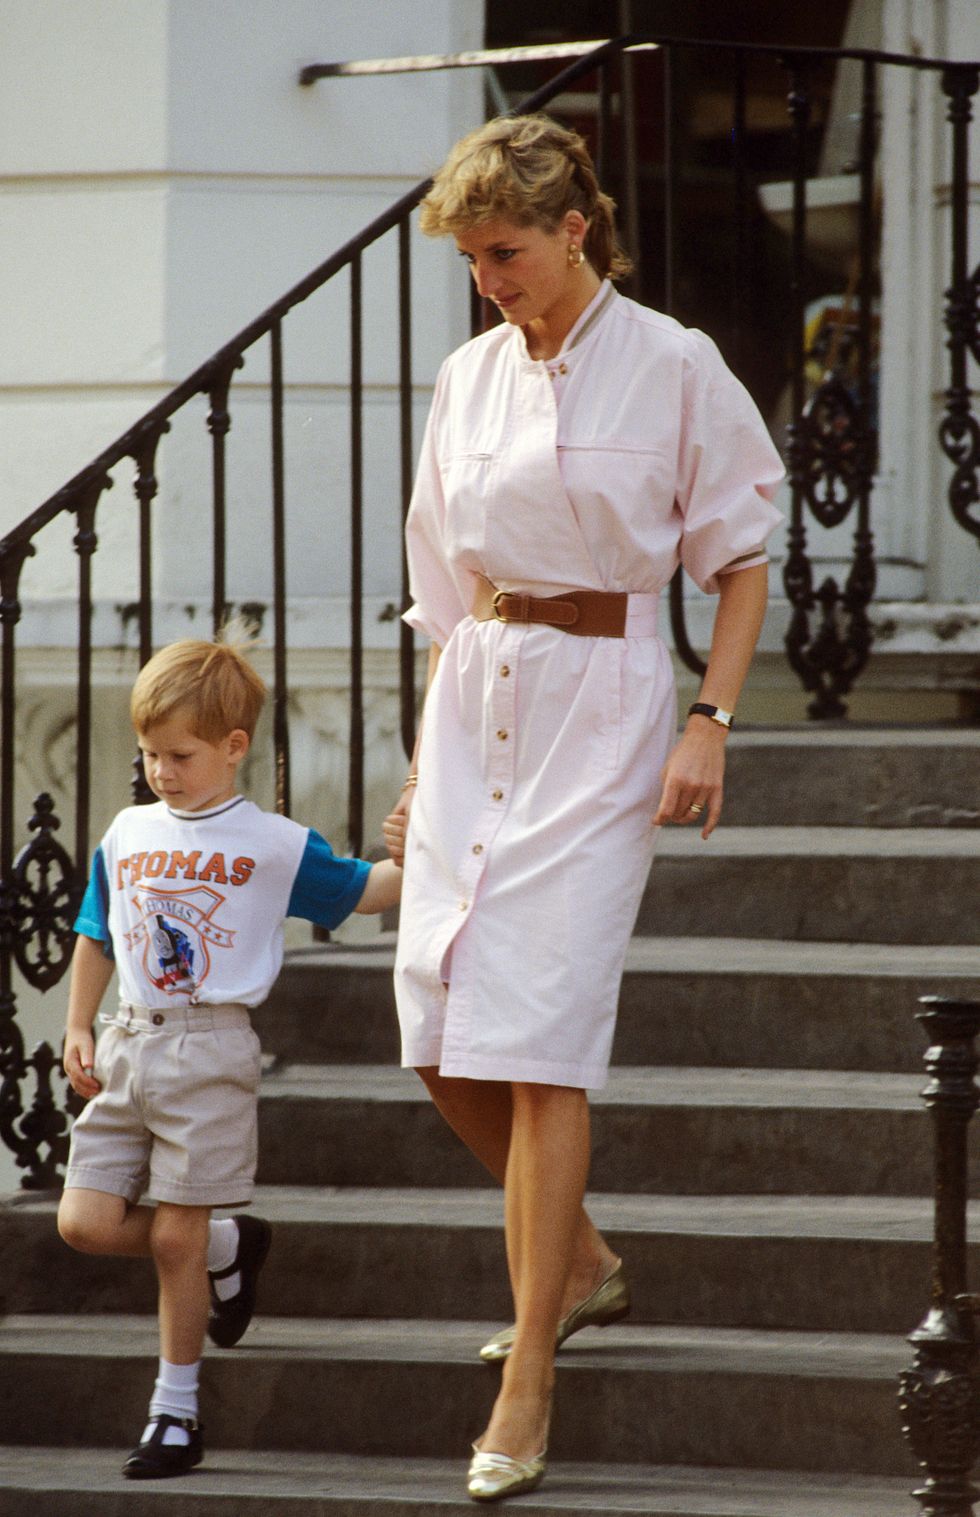 london   june file photo prince harry wears a thomas the tank engine tee shirt when he leaves nursery school with his mother, diana, princess of wales  in june 1989  in london, england  photo by anwar husseinwireimage